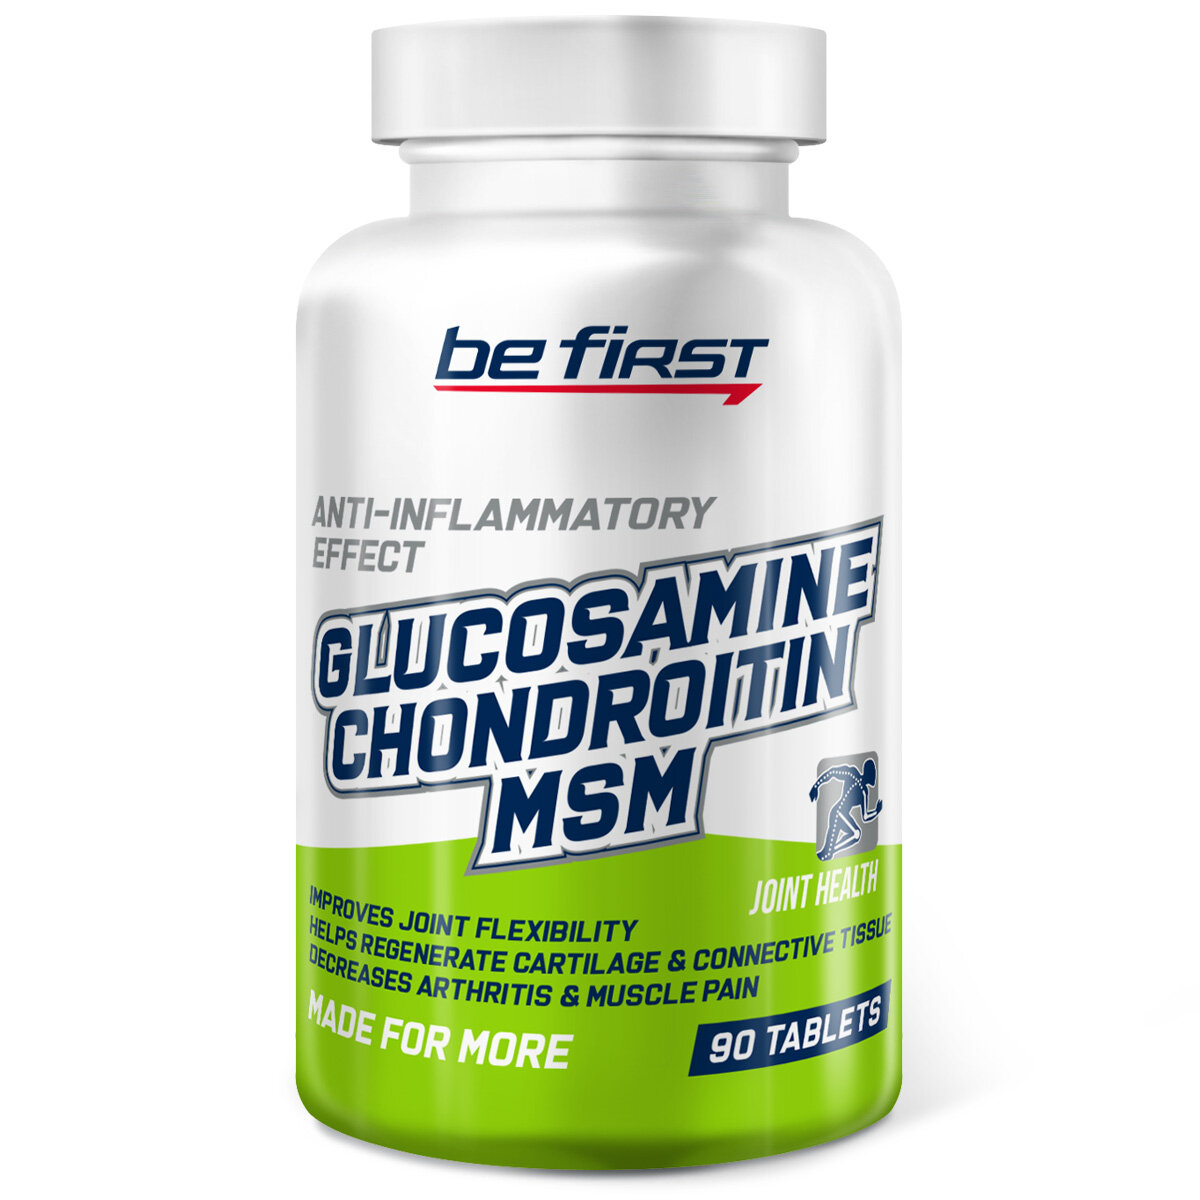 Be First Glucosamine Chondroitin MSM 90 таблеток (Be First)